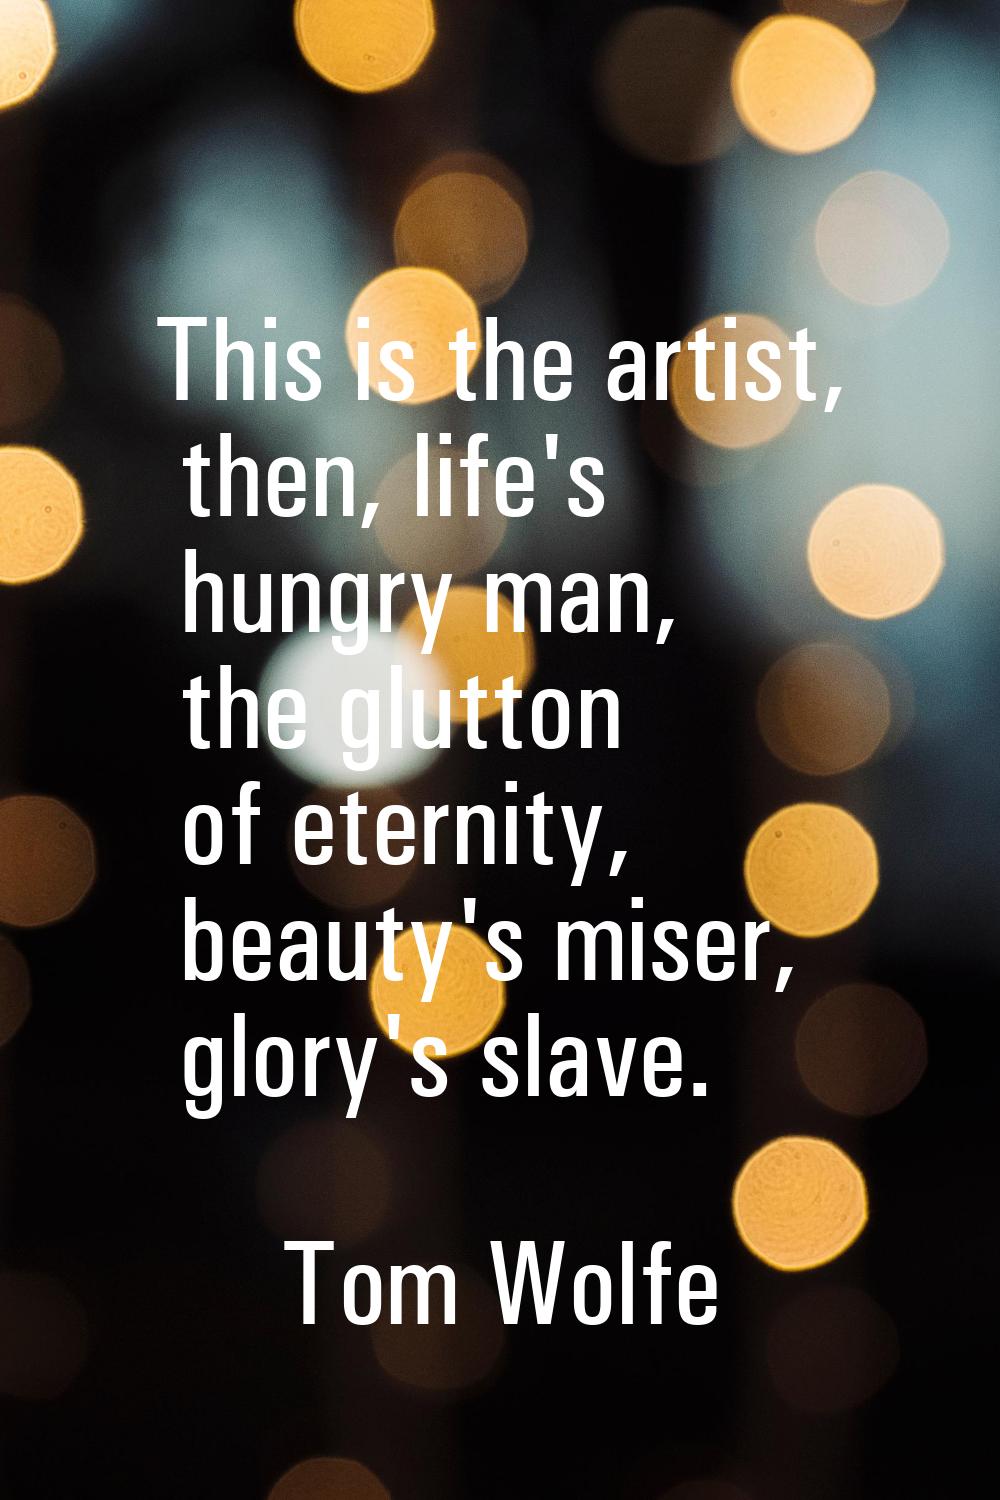 This is the artist, then, life's hungry man, the glutton of eternity, beauty's miser, glory's slave